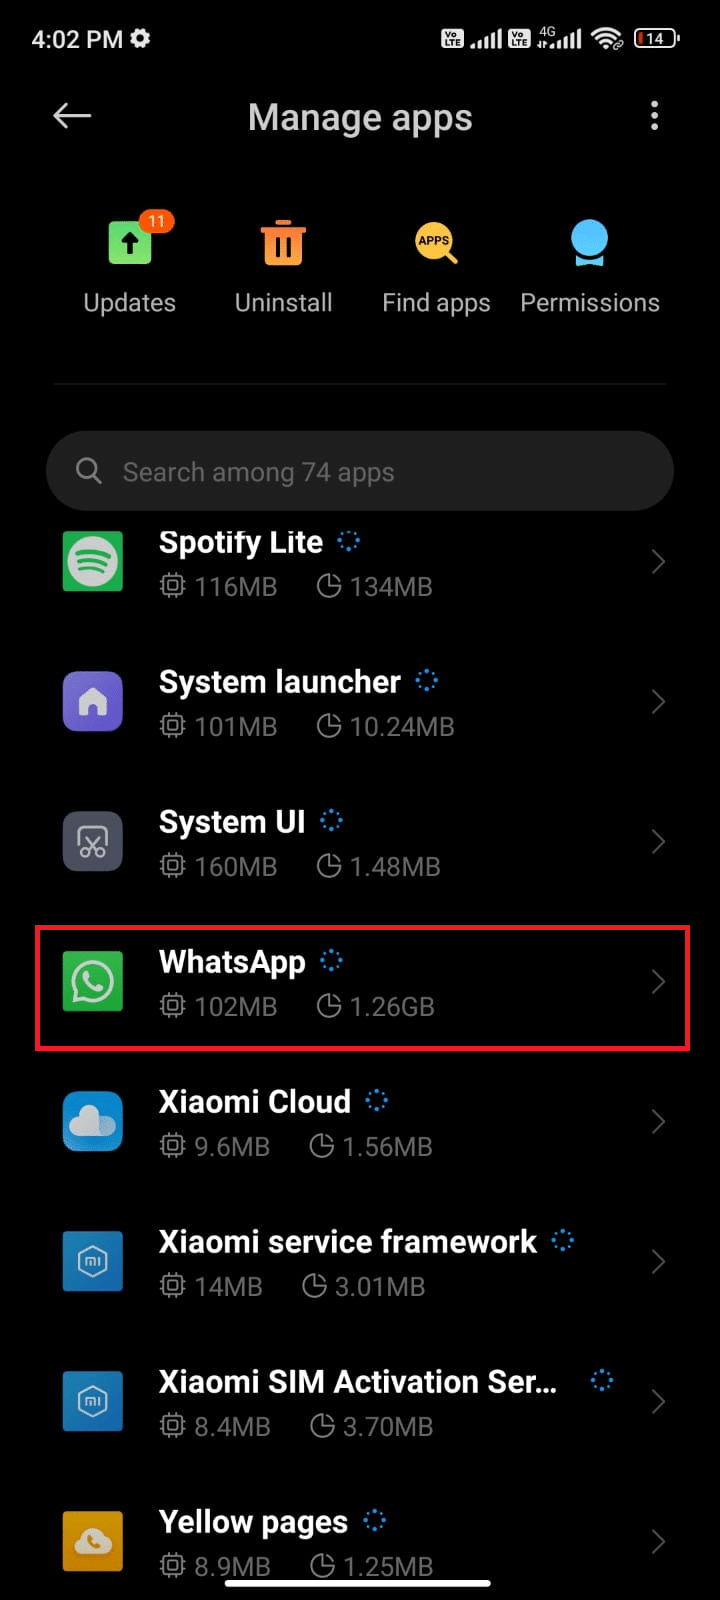 tap on Manage apps and then WhatsApp